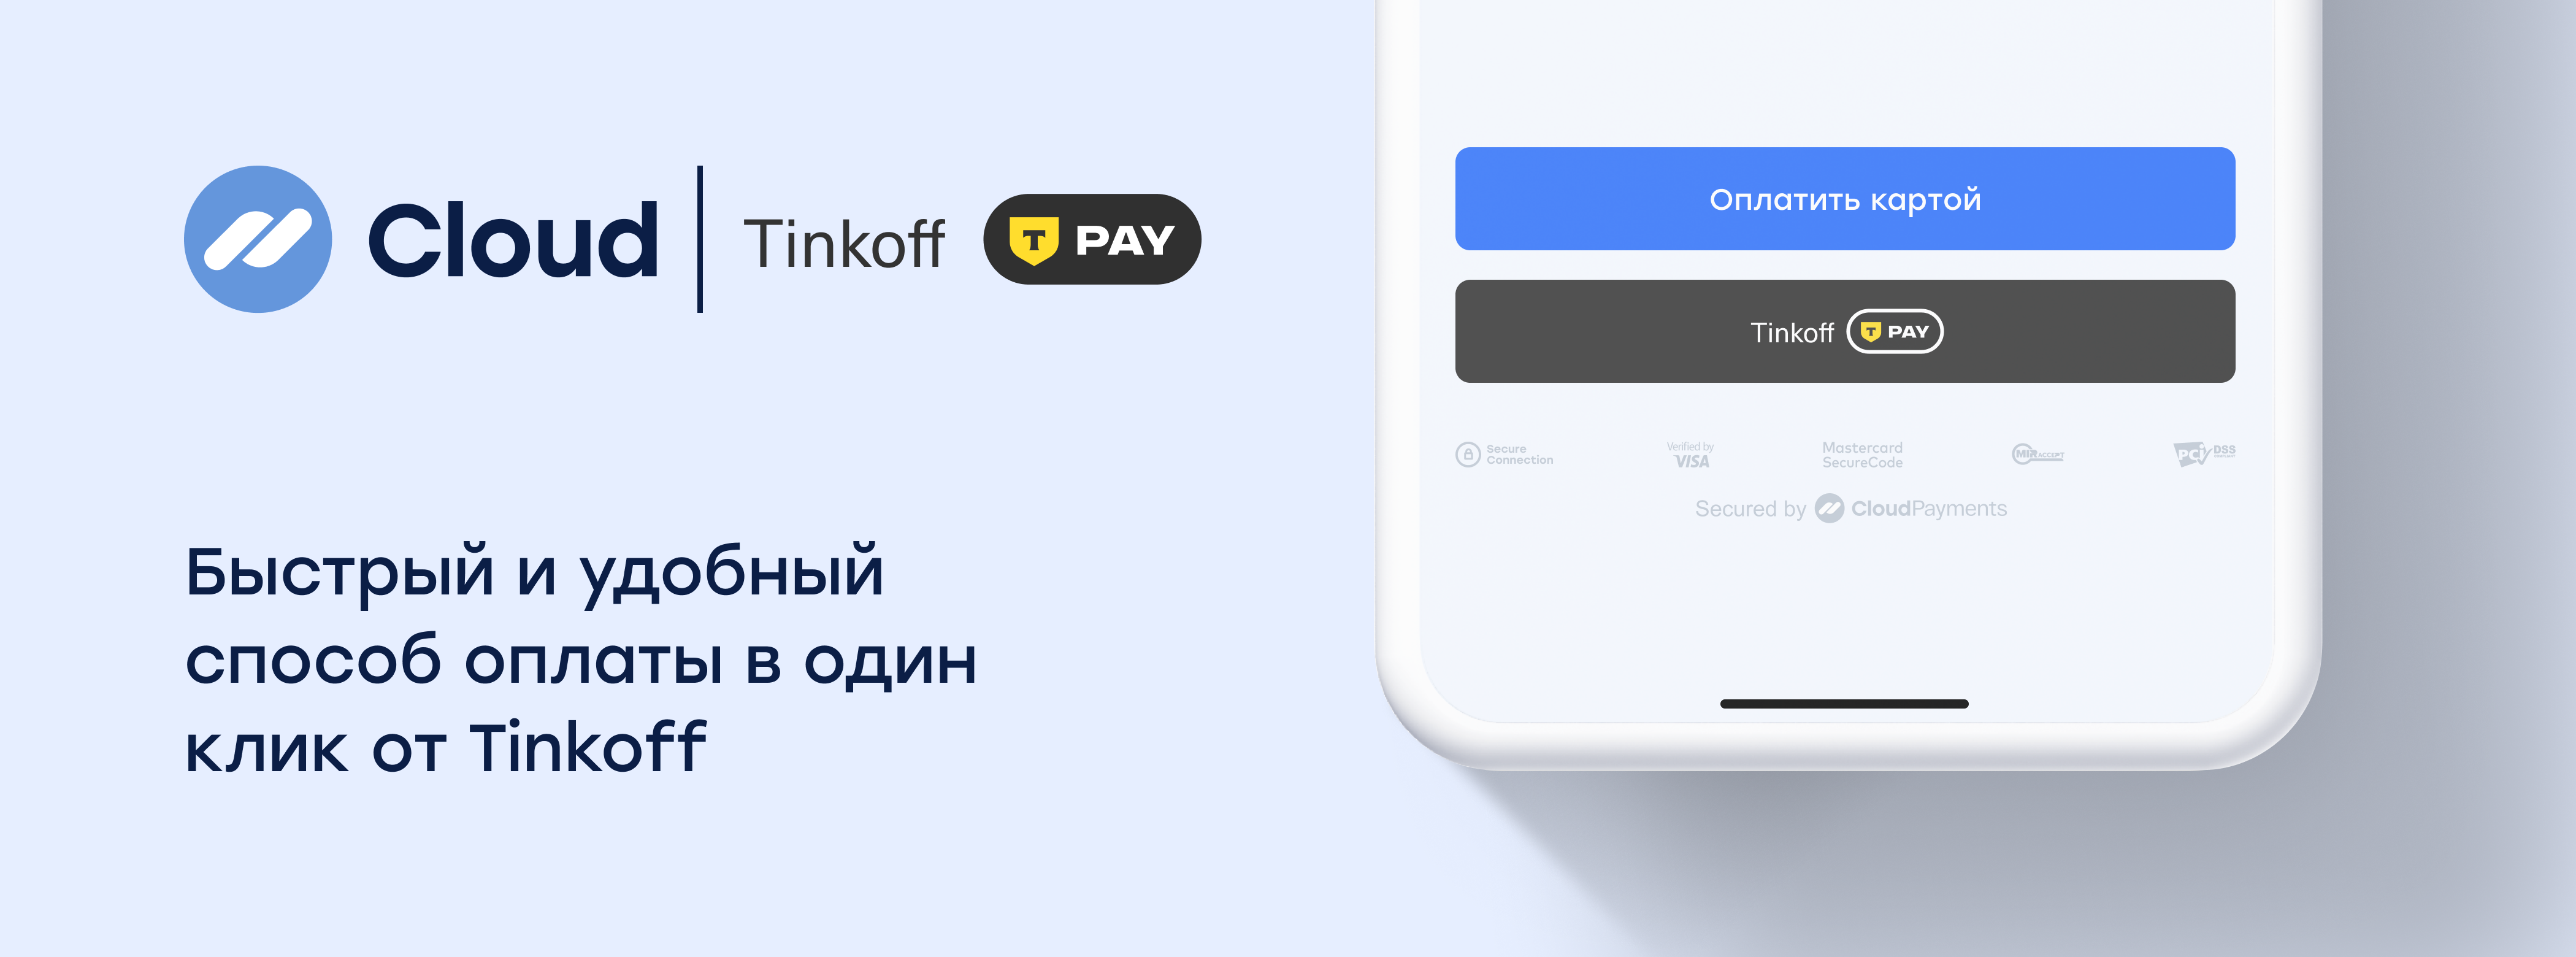 tinkoffpay_cloud